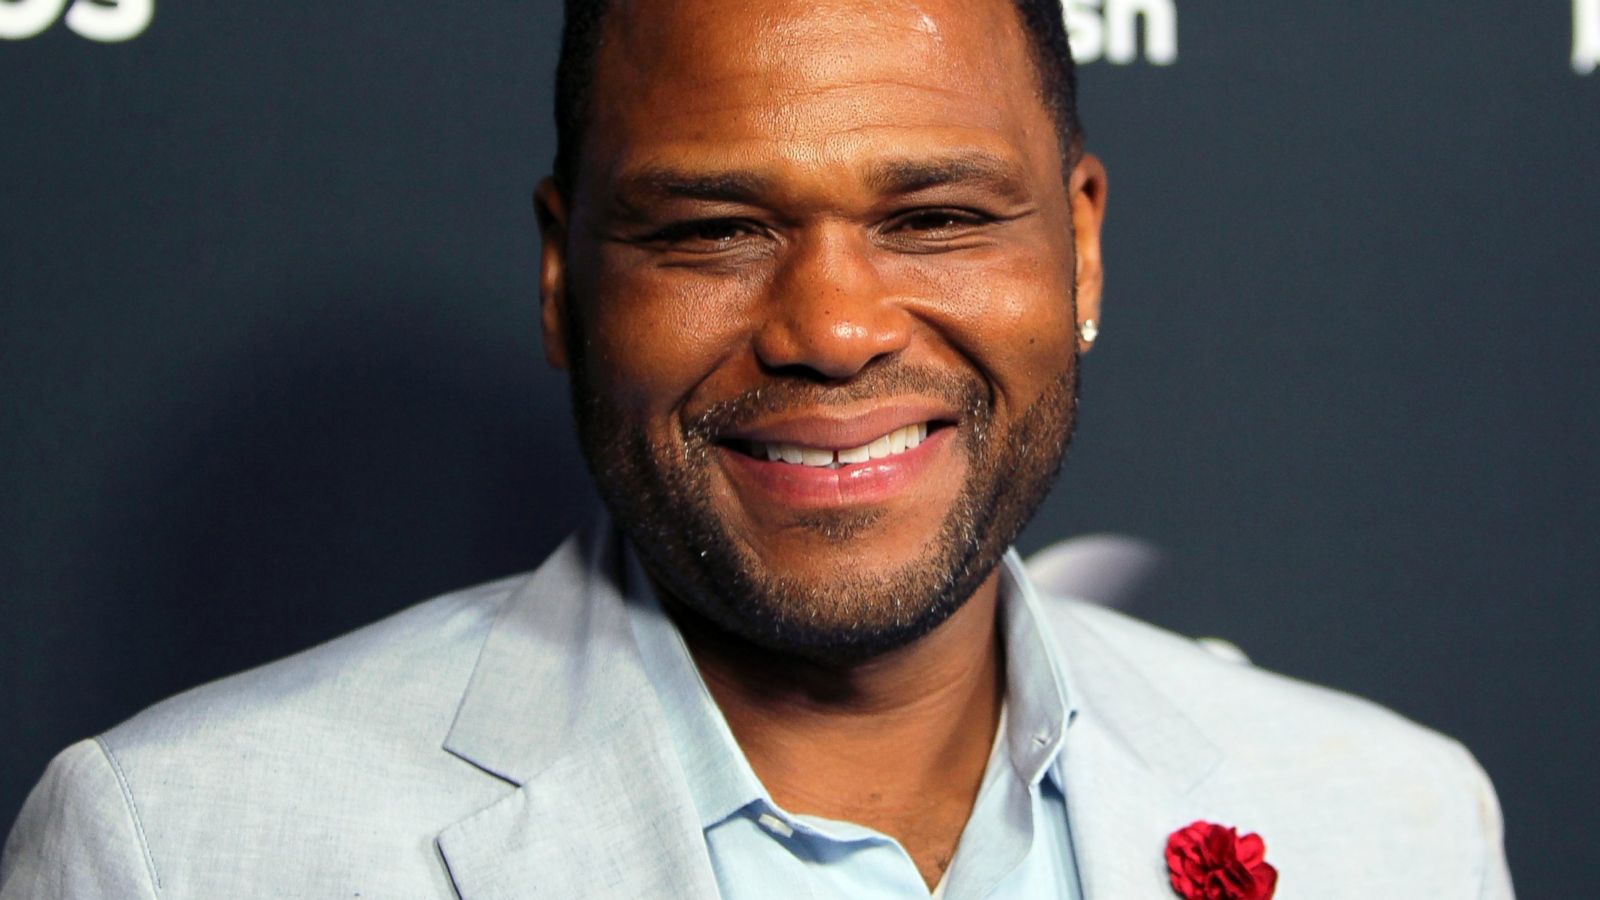 Anthony Anderson Reveals Why He's Now Working With His Mother